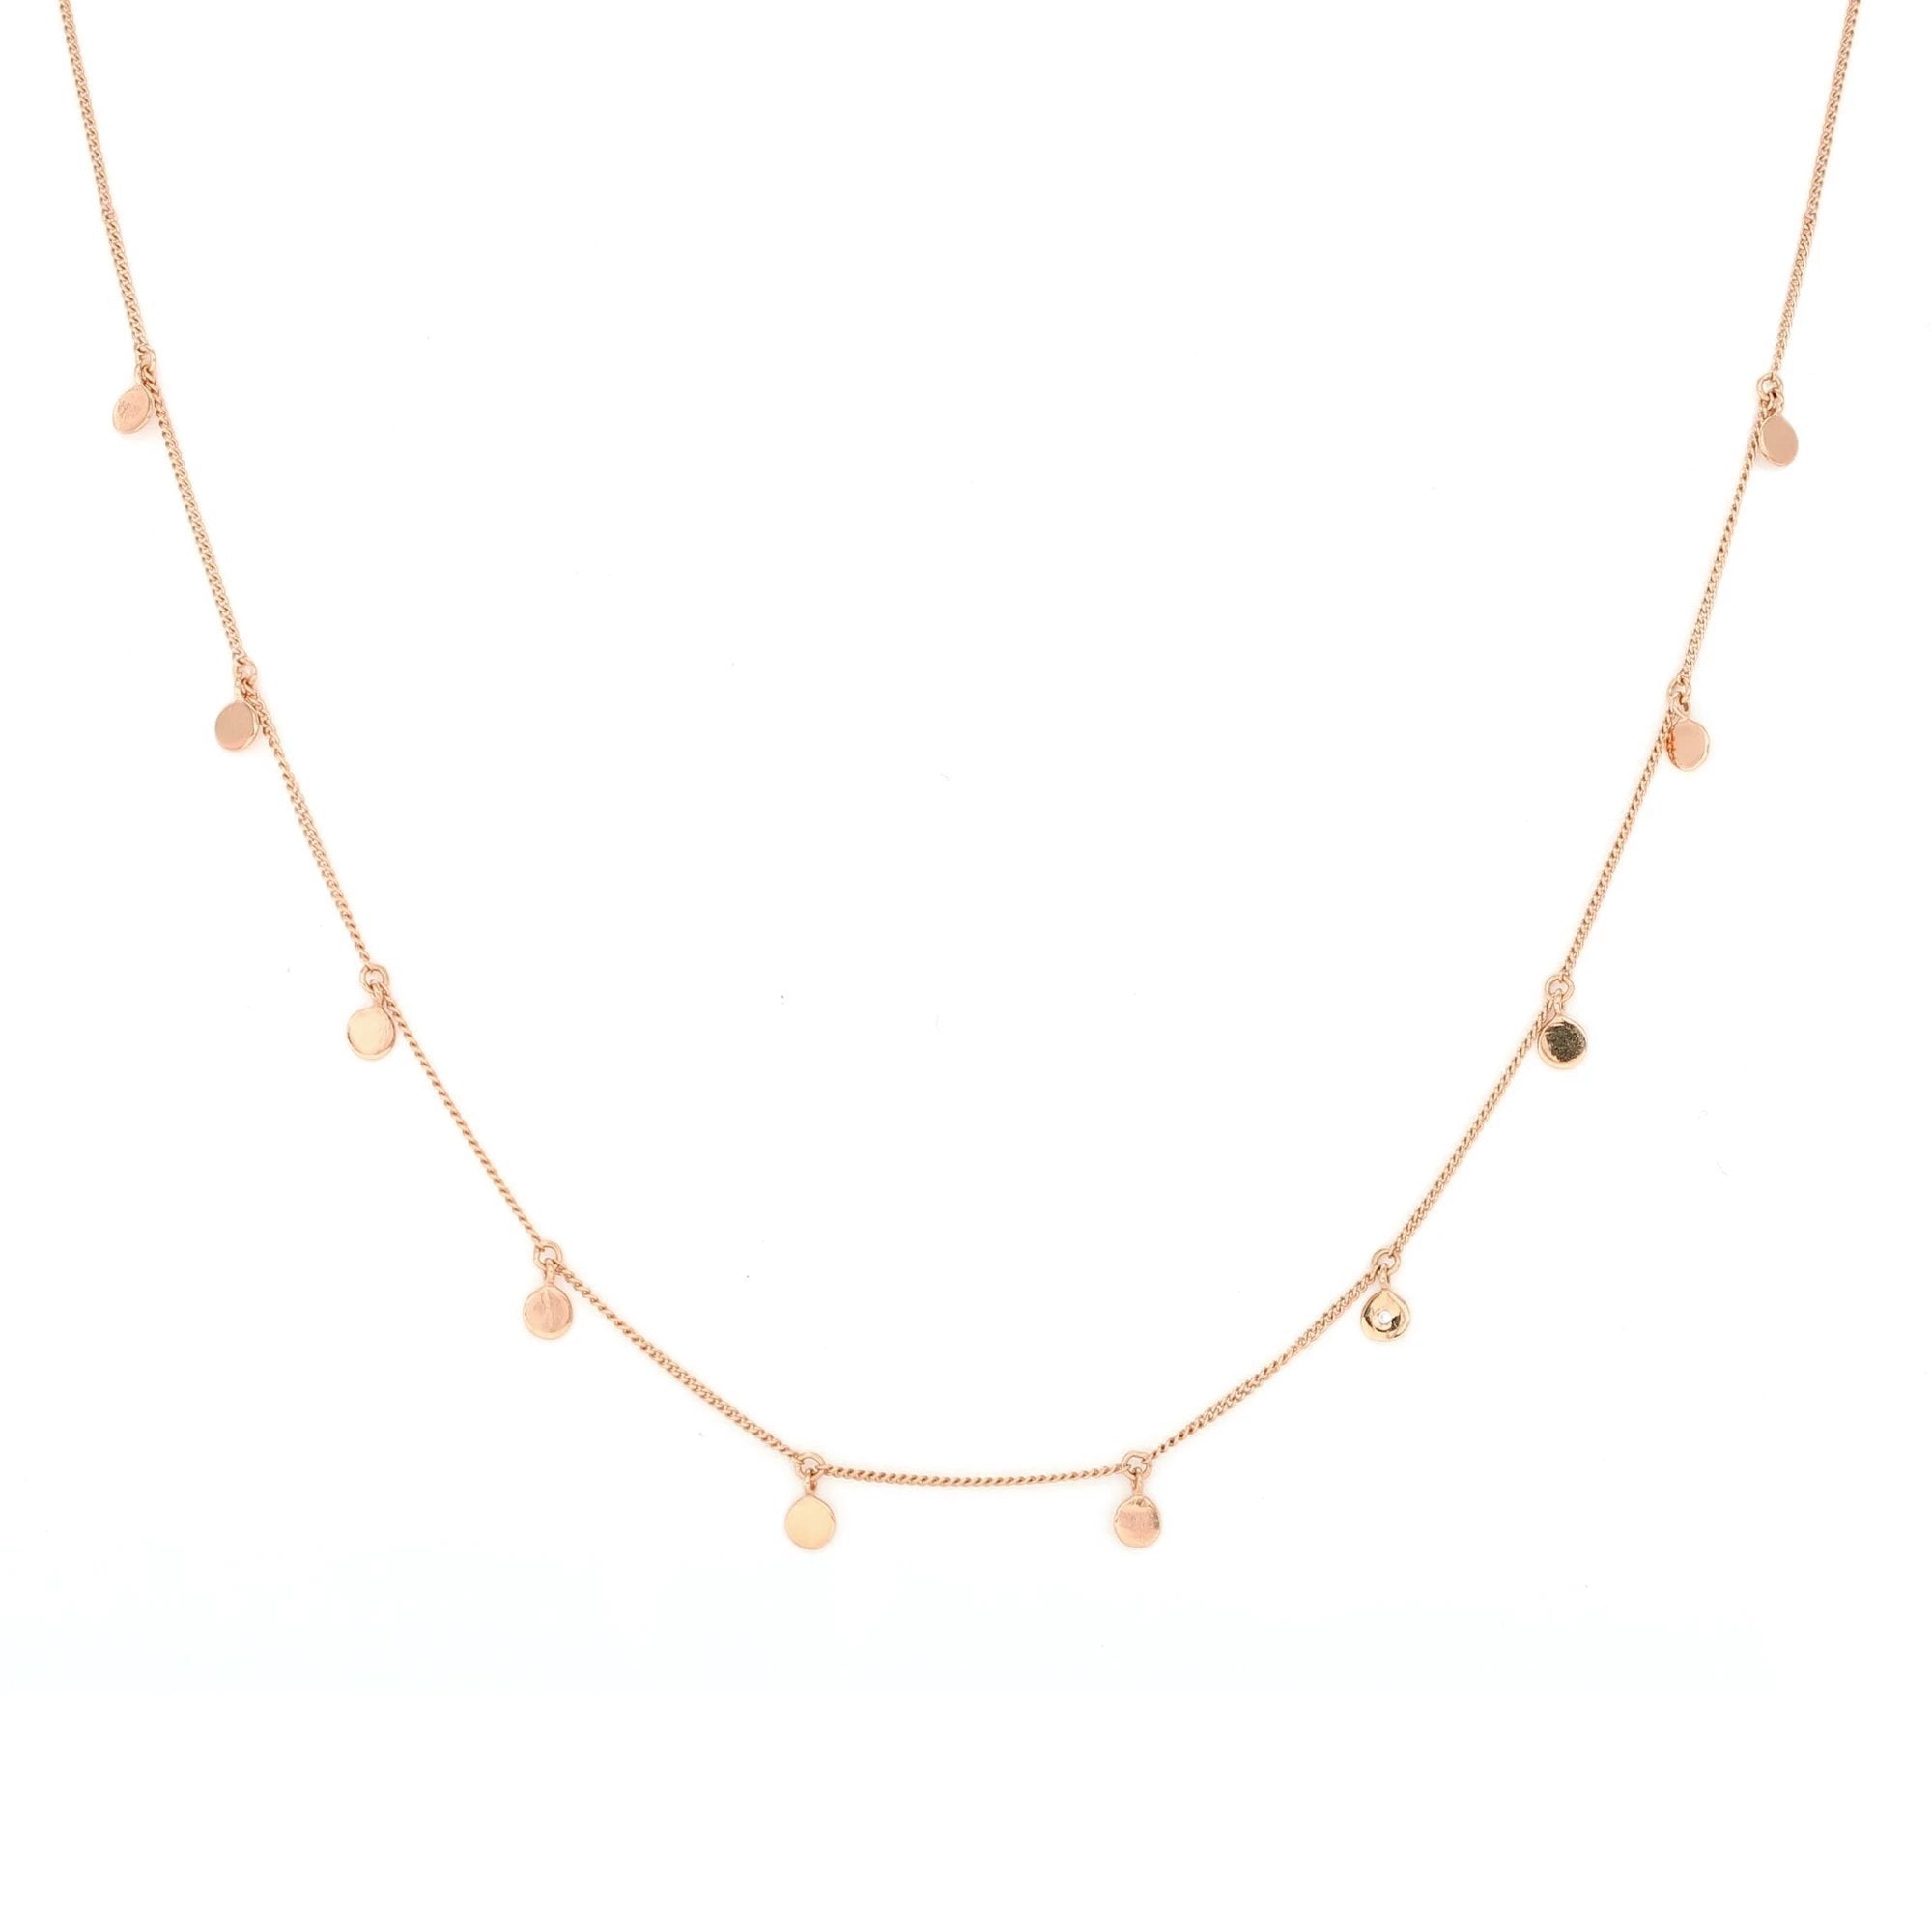 DAINTY POISE DISK NECKLACE - CUBIC ZIRCONIA & ROSE GOLD - SO PRETTY CARA COTTER